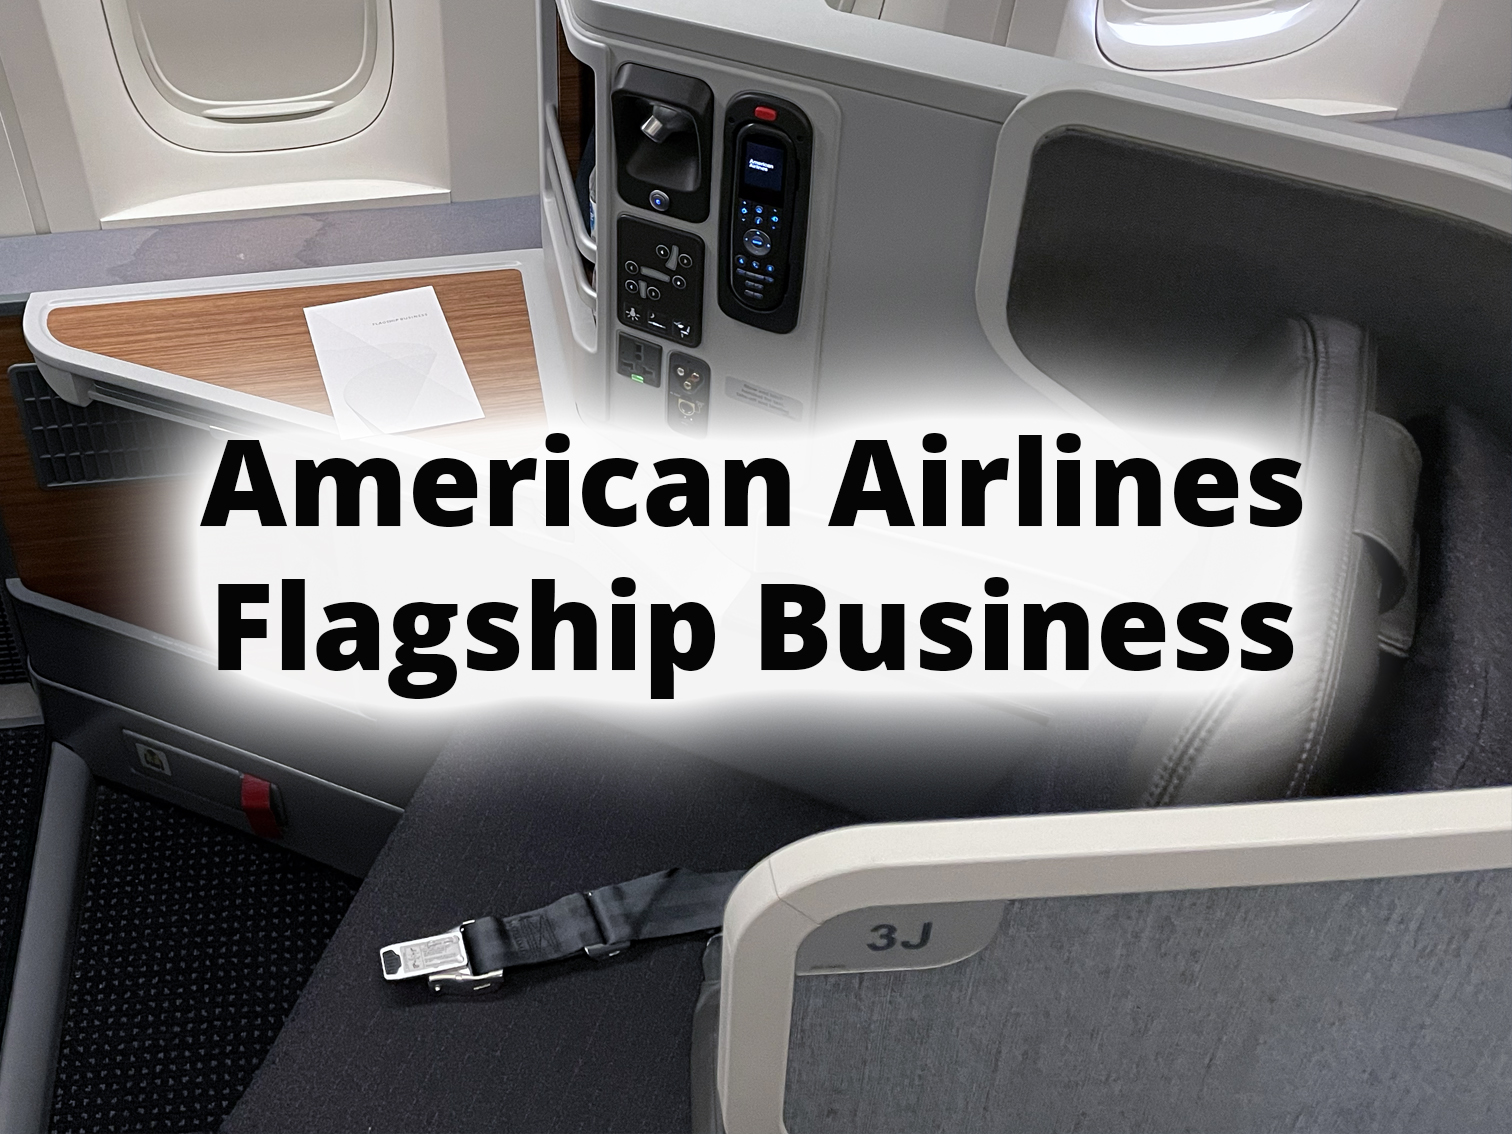 Flying Flagship Business on American Airlines